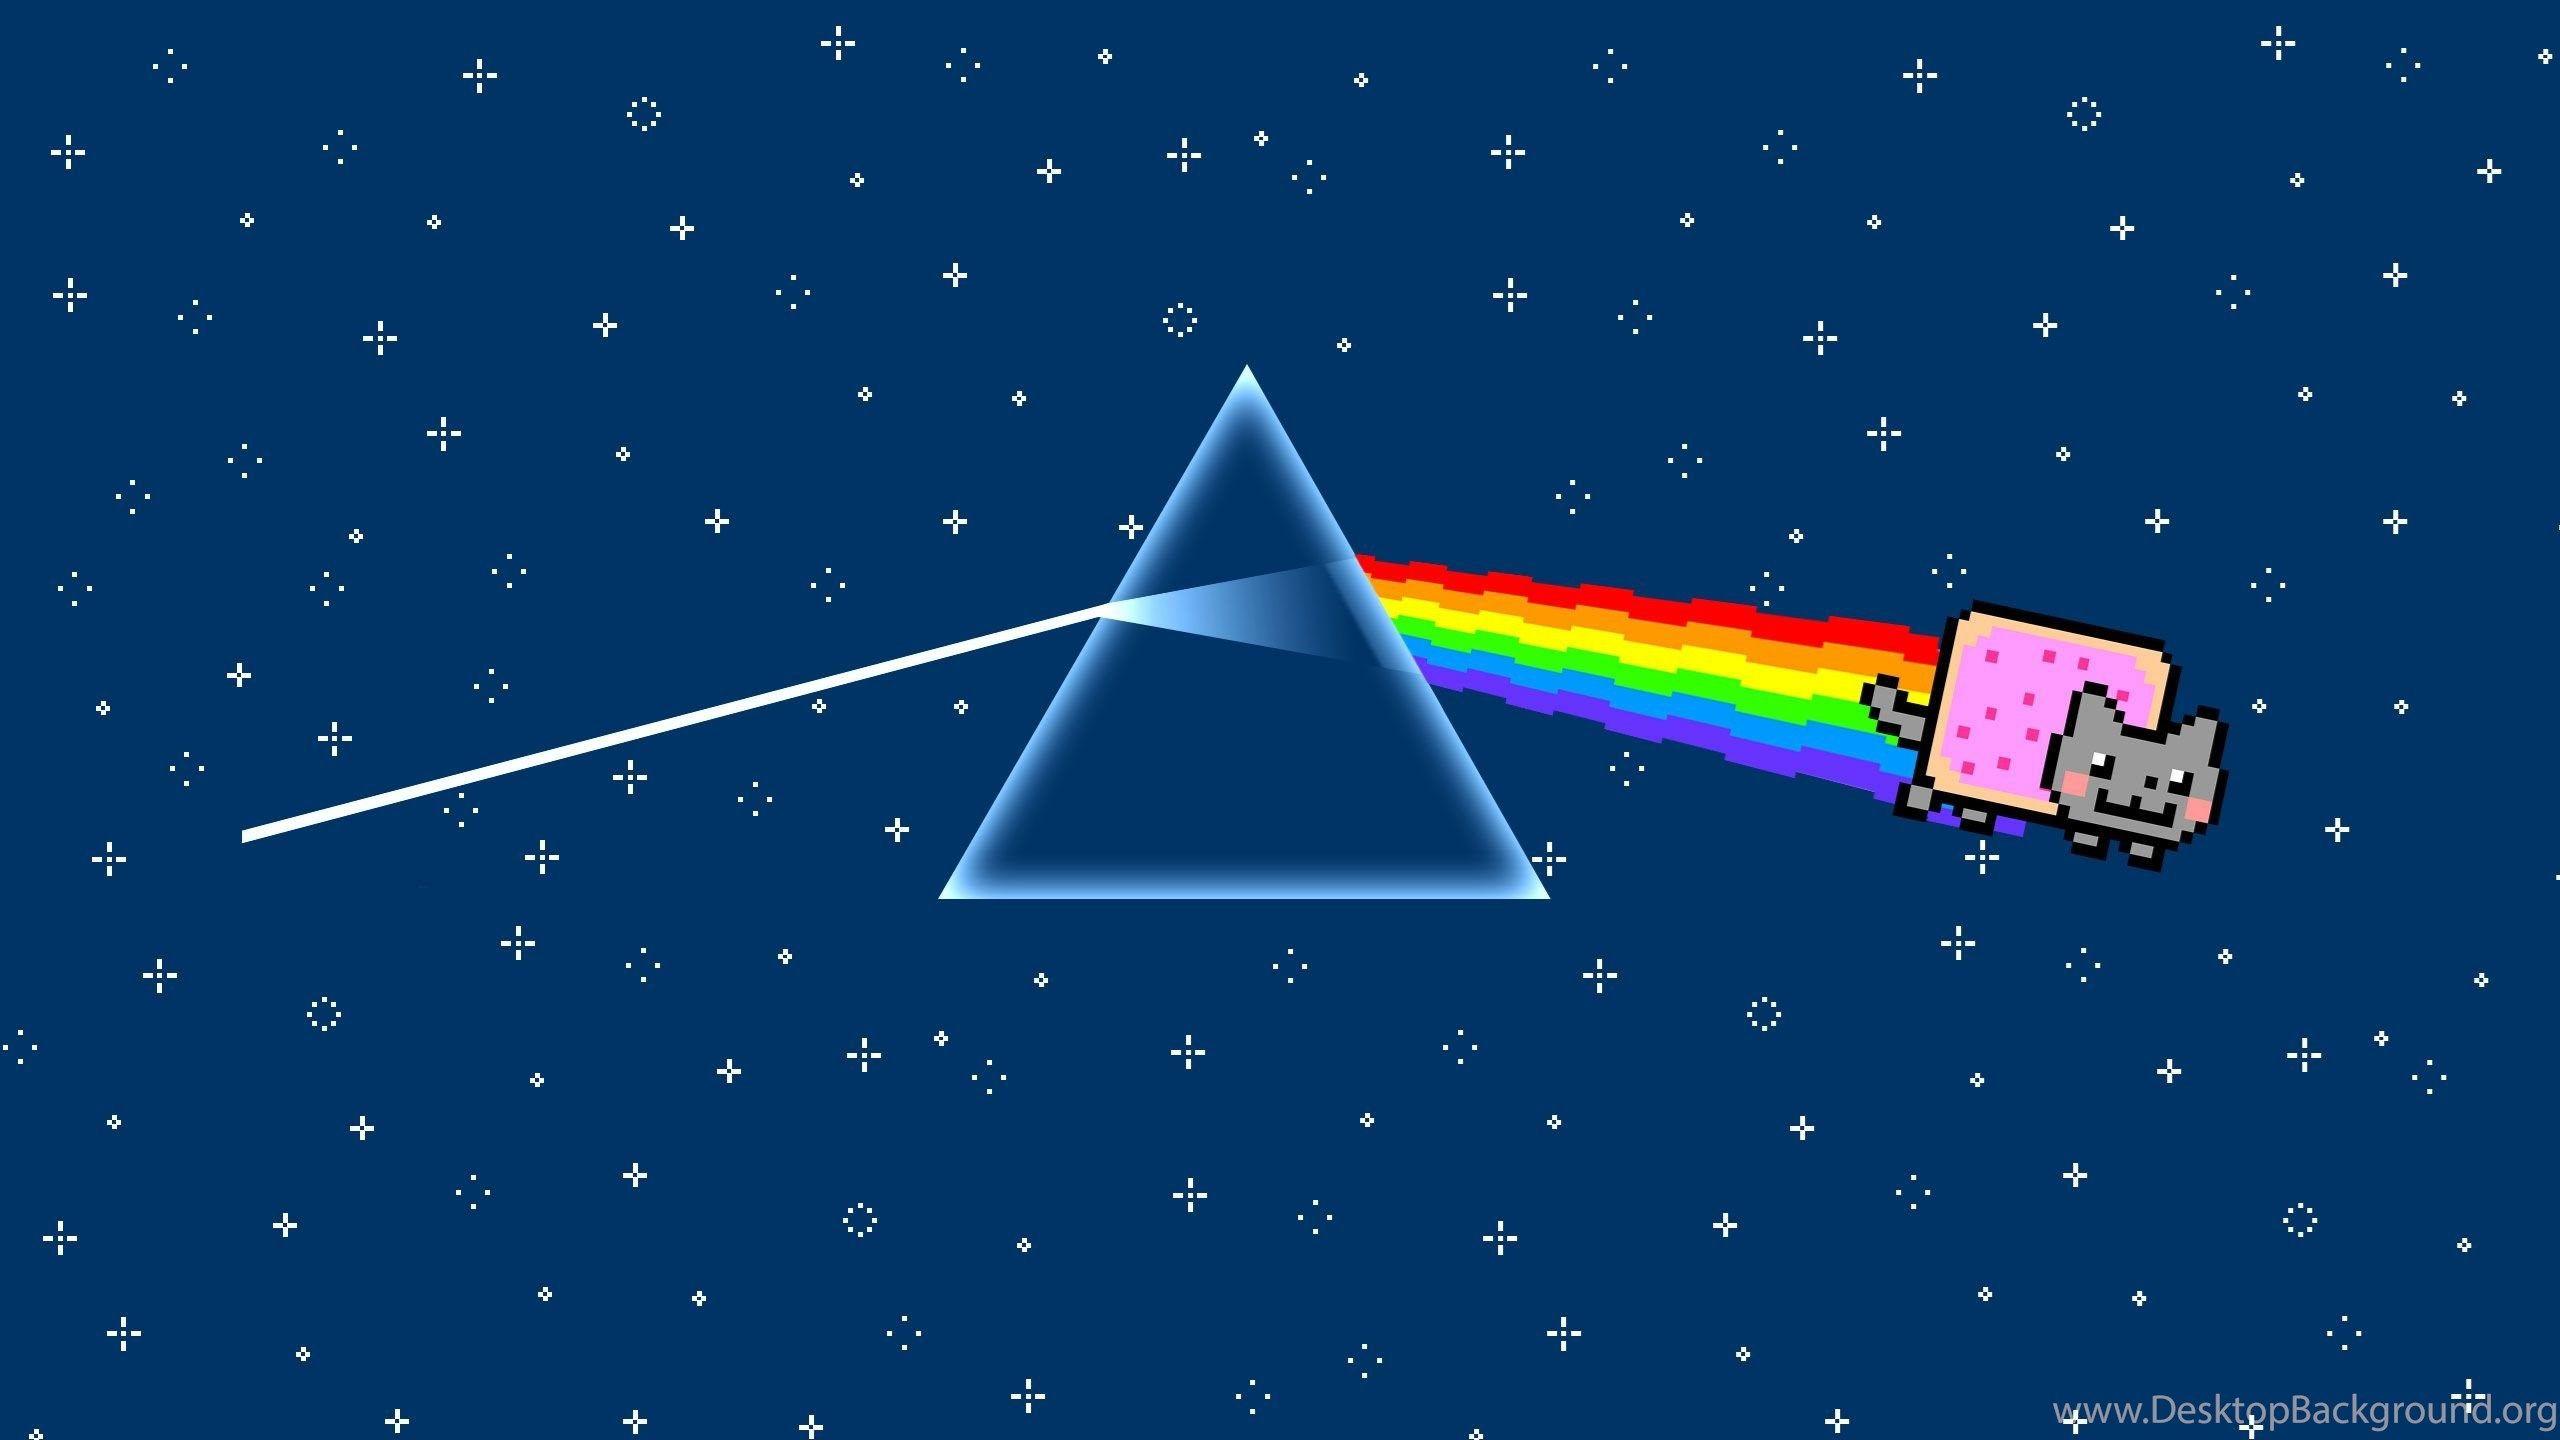 Pink Floyd The Dark Side Of The Moon Wallpapers Hd ✓ Labzada Wallpapers